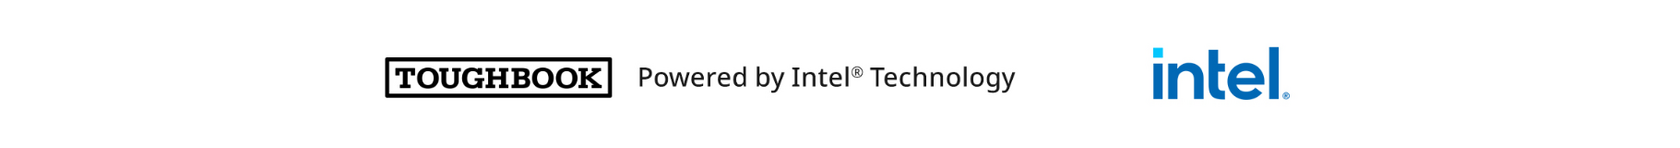 intel and toughbook logo